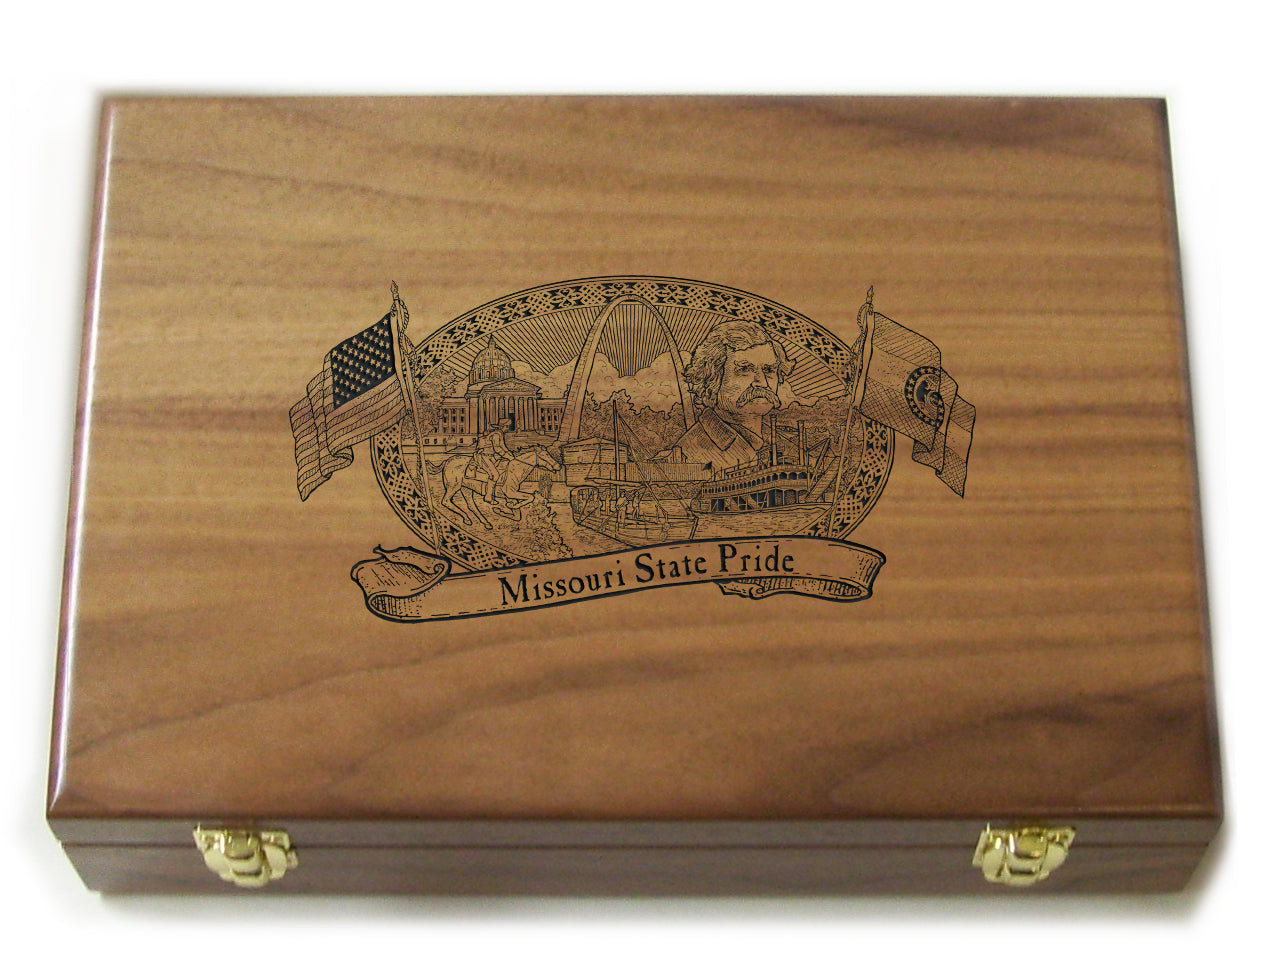 Missouri State Pride Limited Edition Engraved 1911